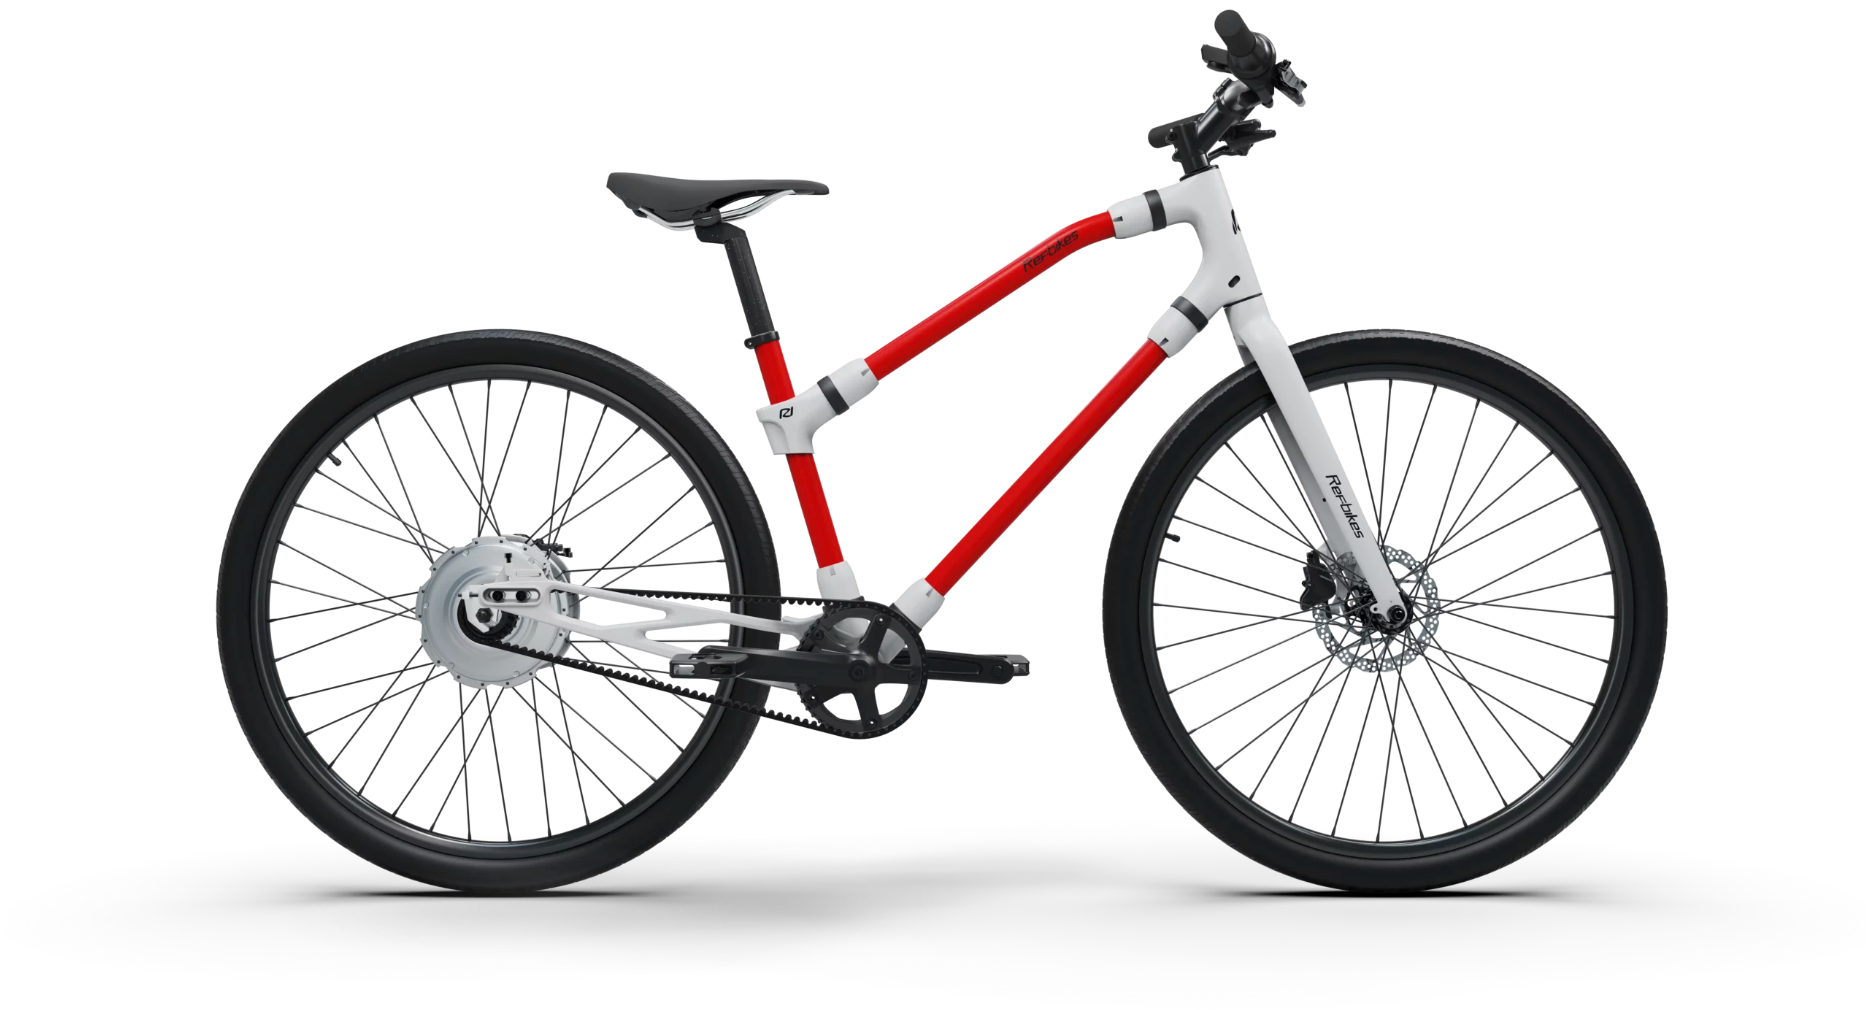 Red and white Essential Boost bicycle, ideal for urban commuting.